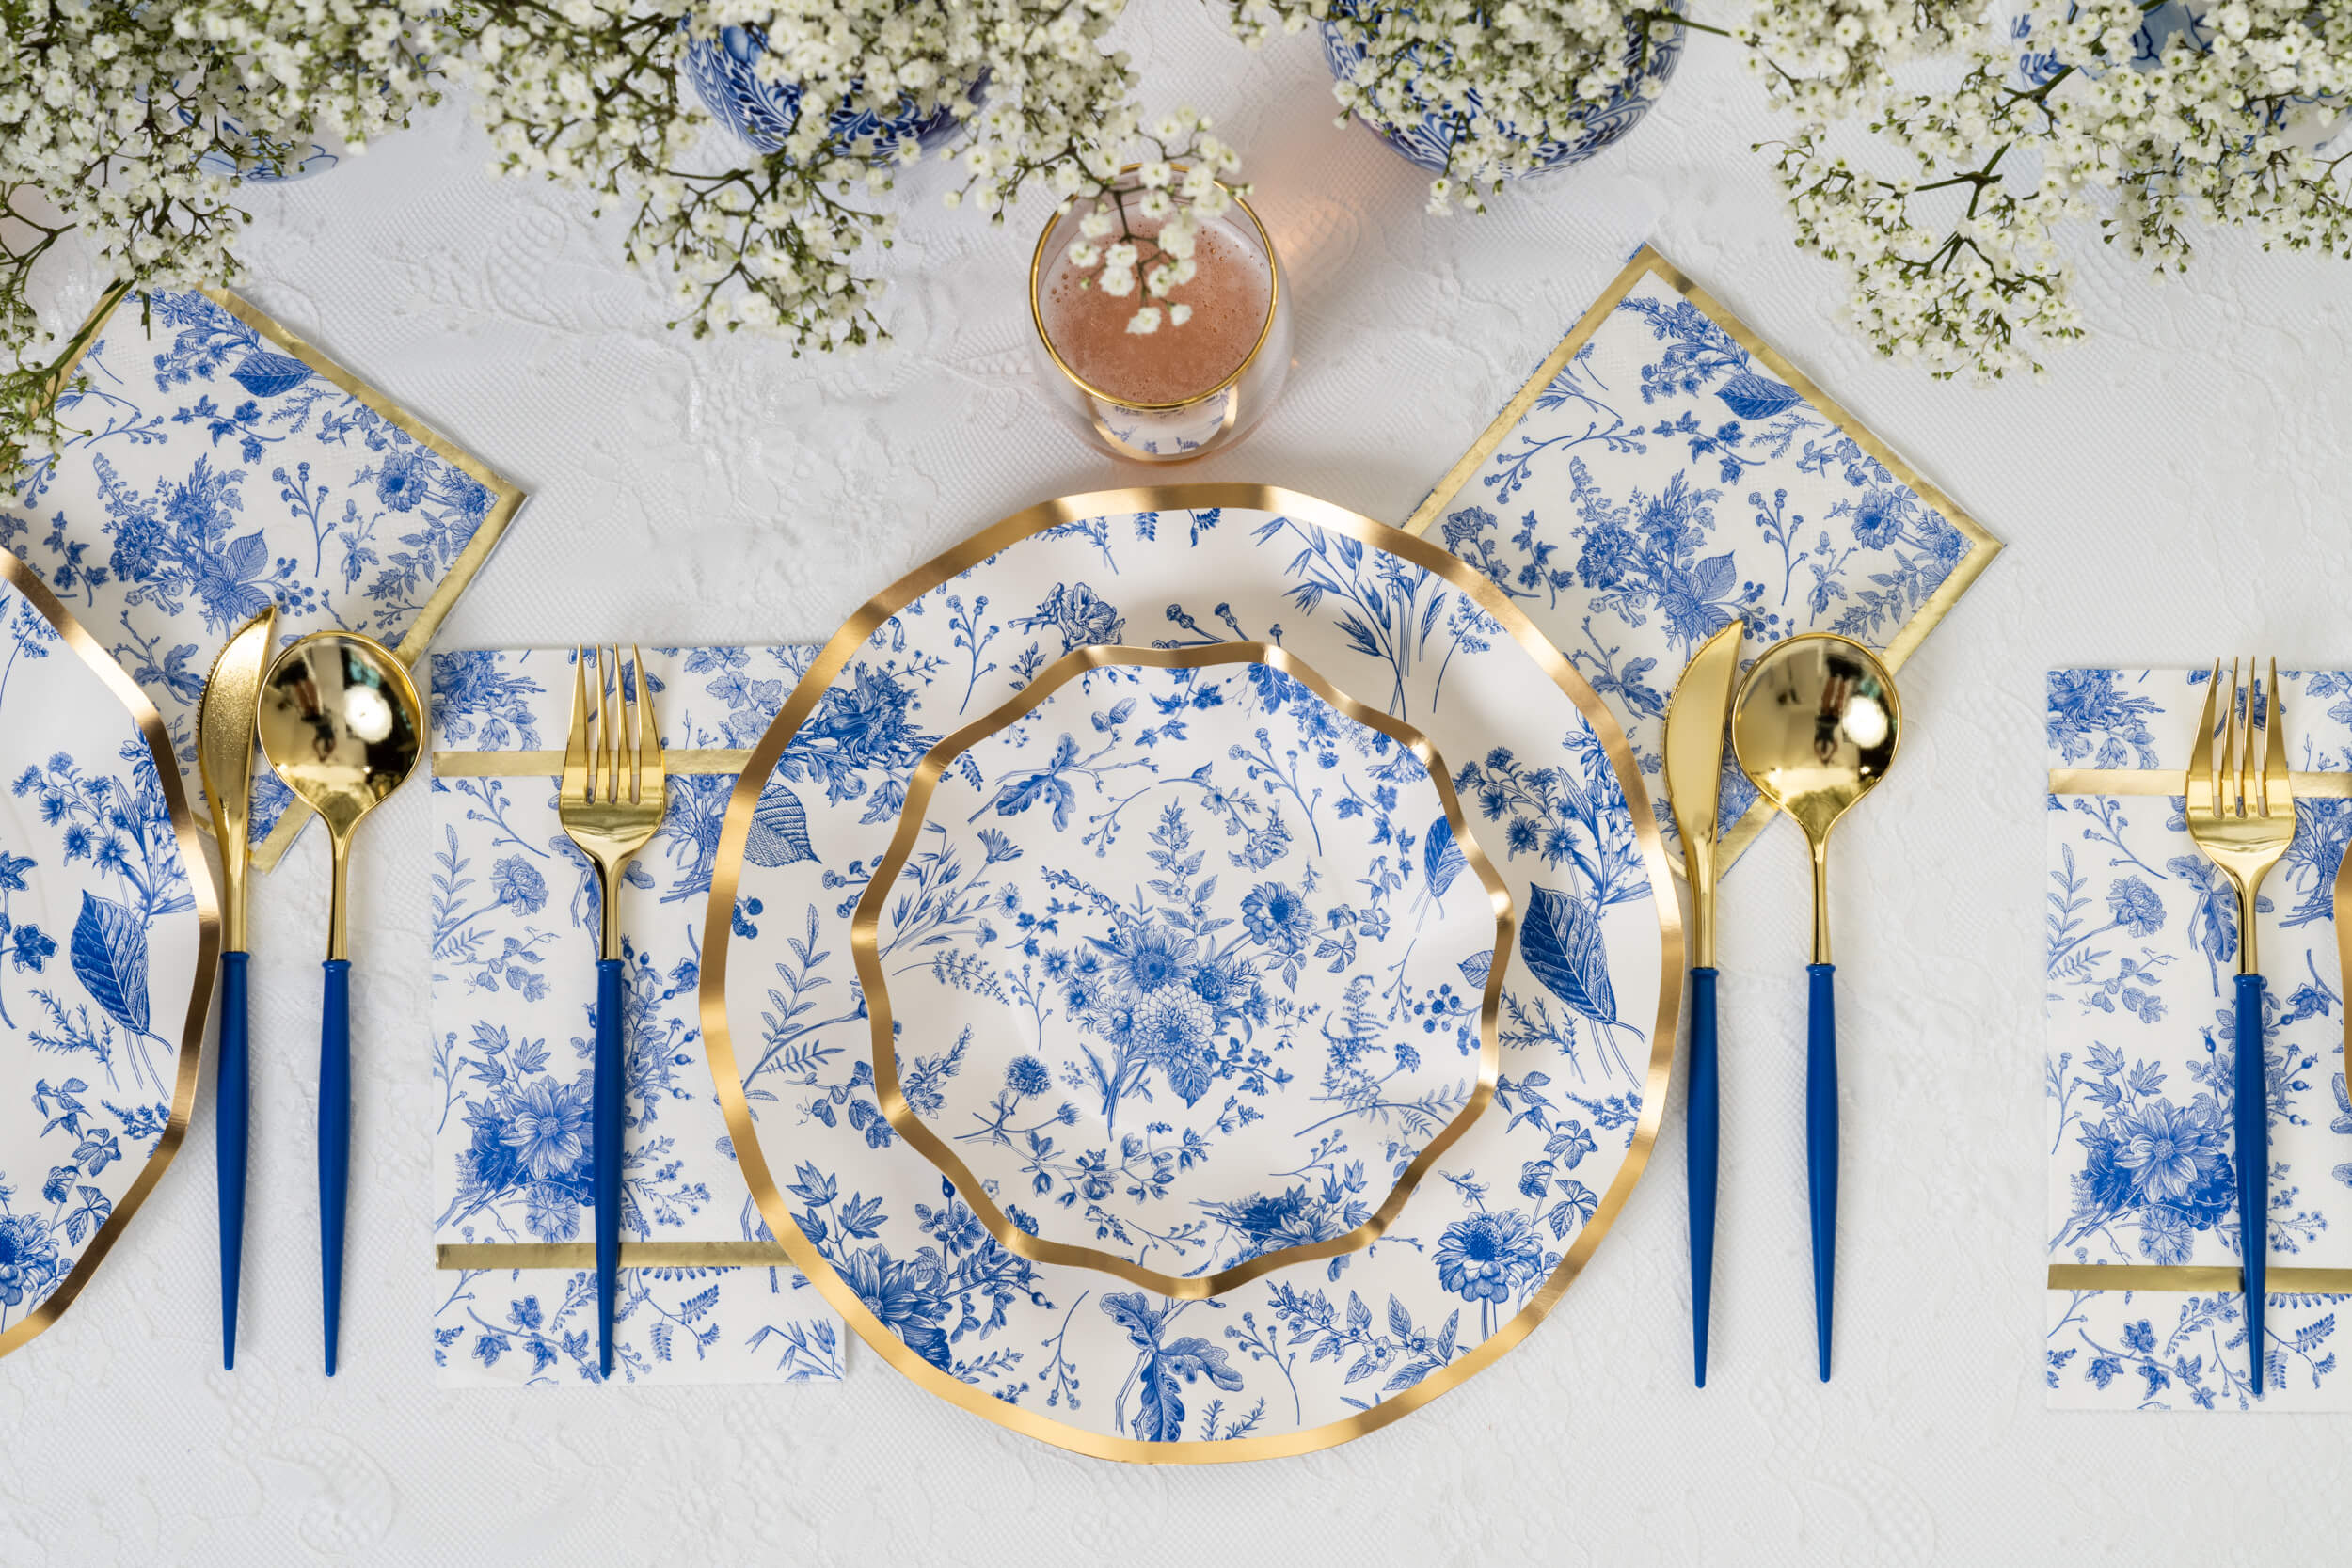 Bella Plastic Cutlery in Gold and Blue, featuring a blue and gold plate, gold spoon and fork, perfect for elevating any event table setting.